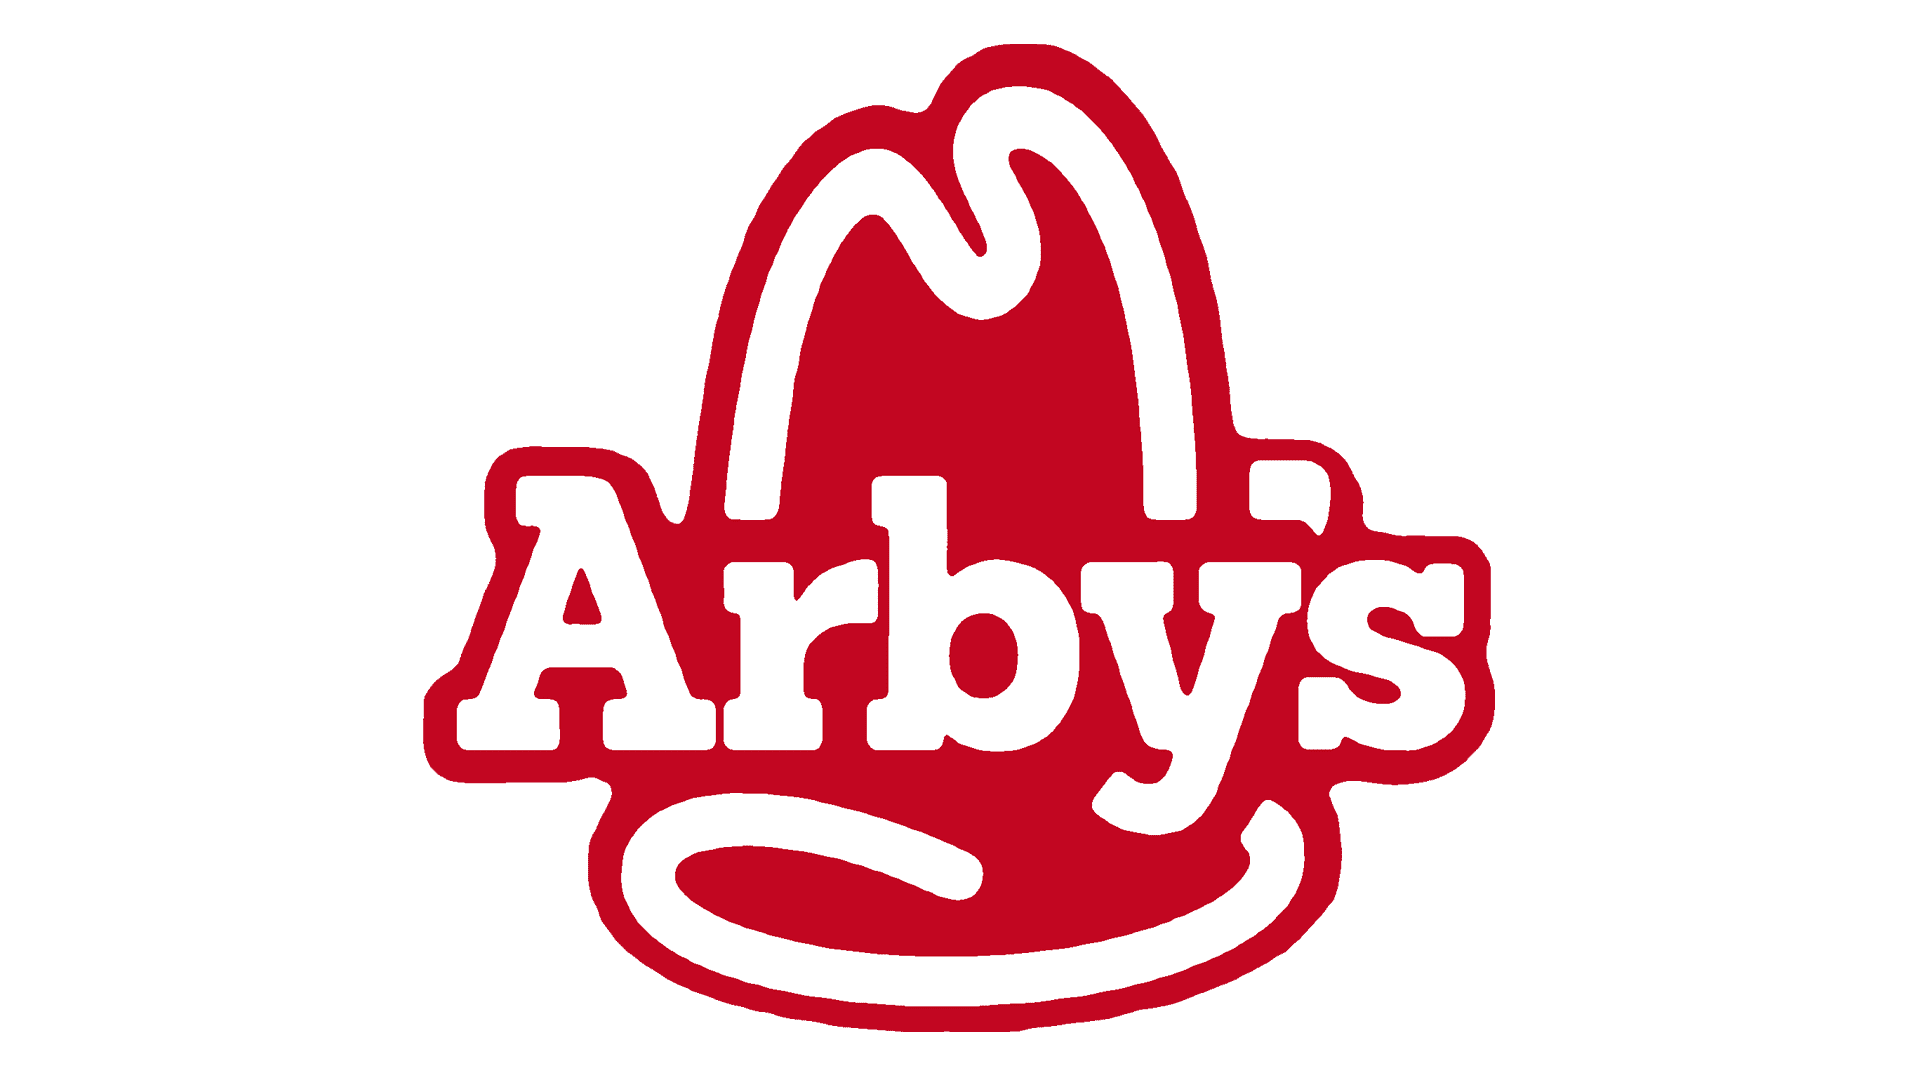 A red and white logo for arby 's.